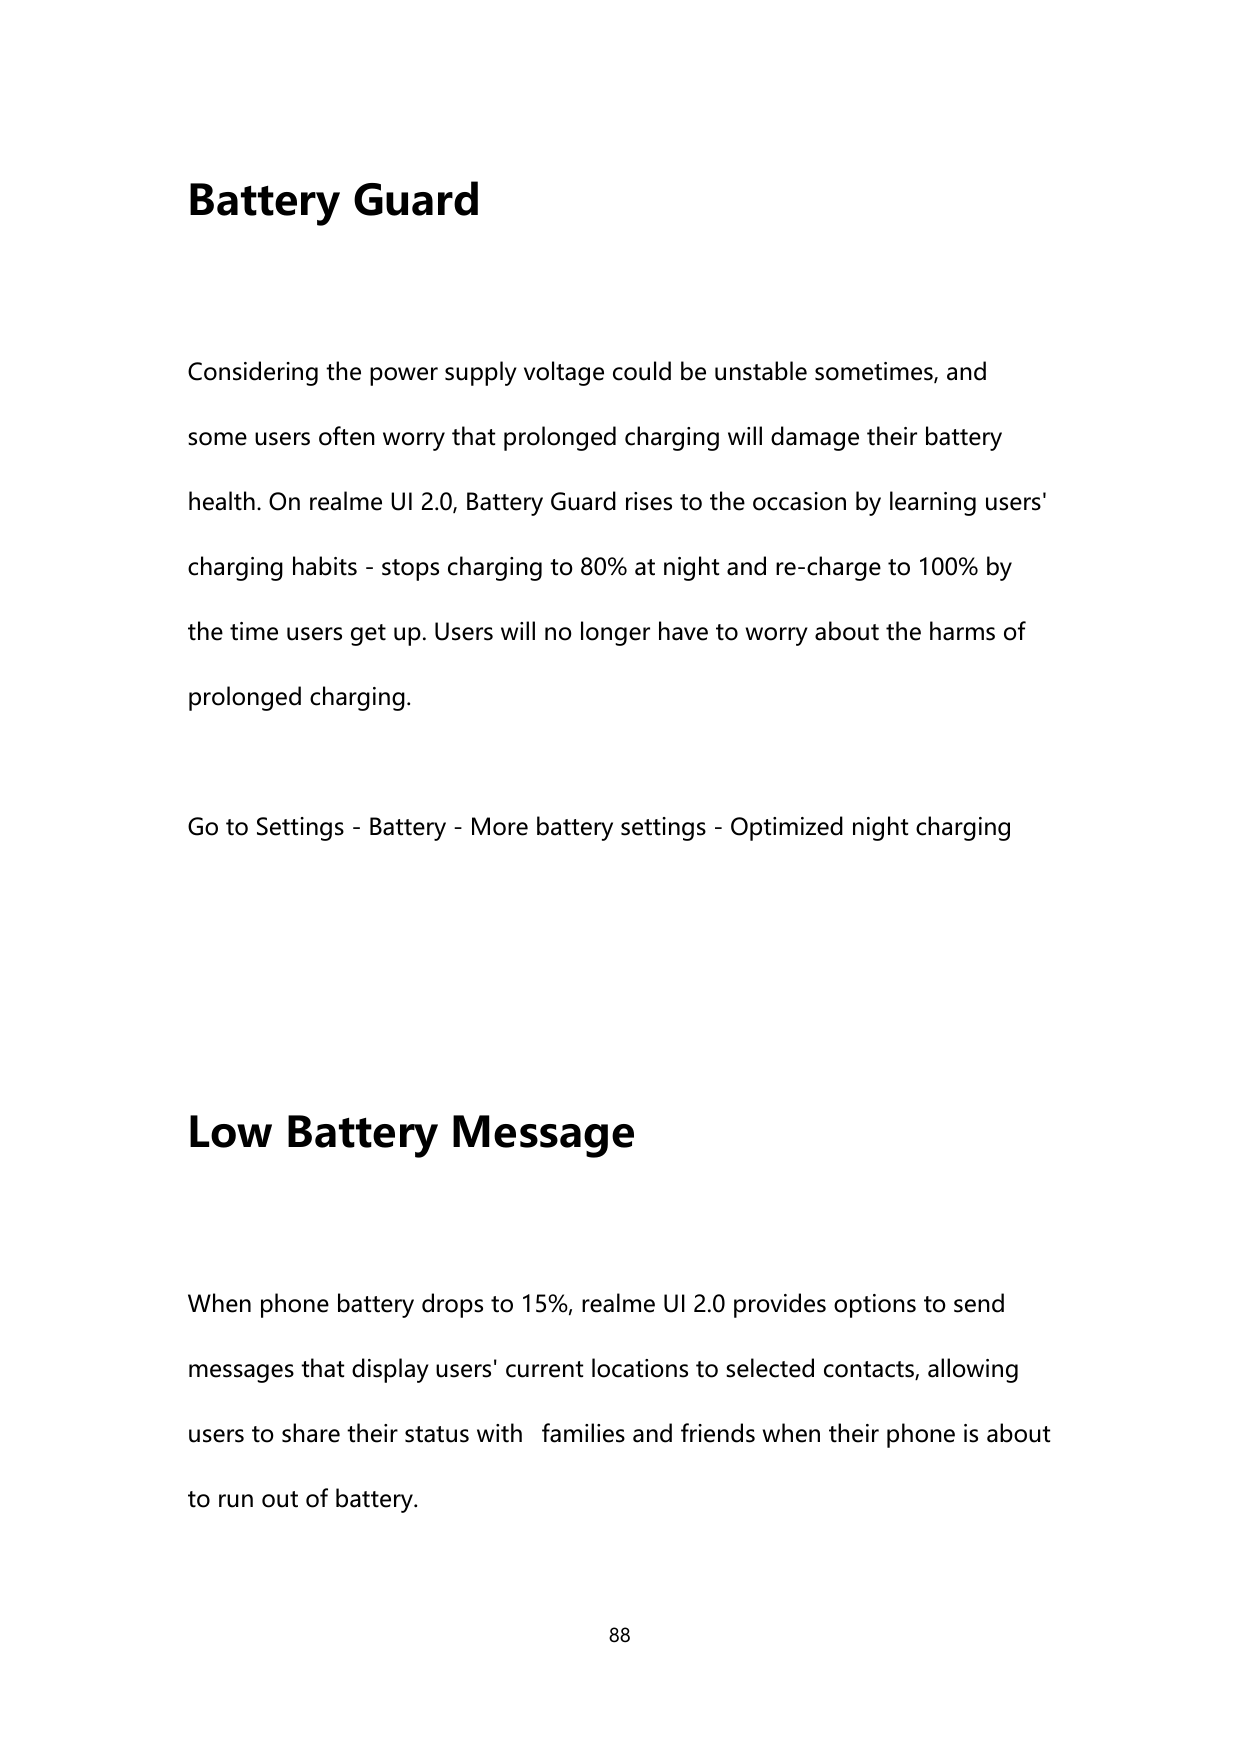 Battery GuardConsidering the power supply voltage could be unstable sometimes, andsome users often worry that prolonged charging